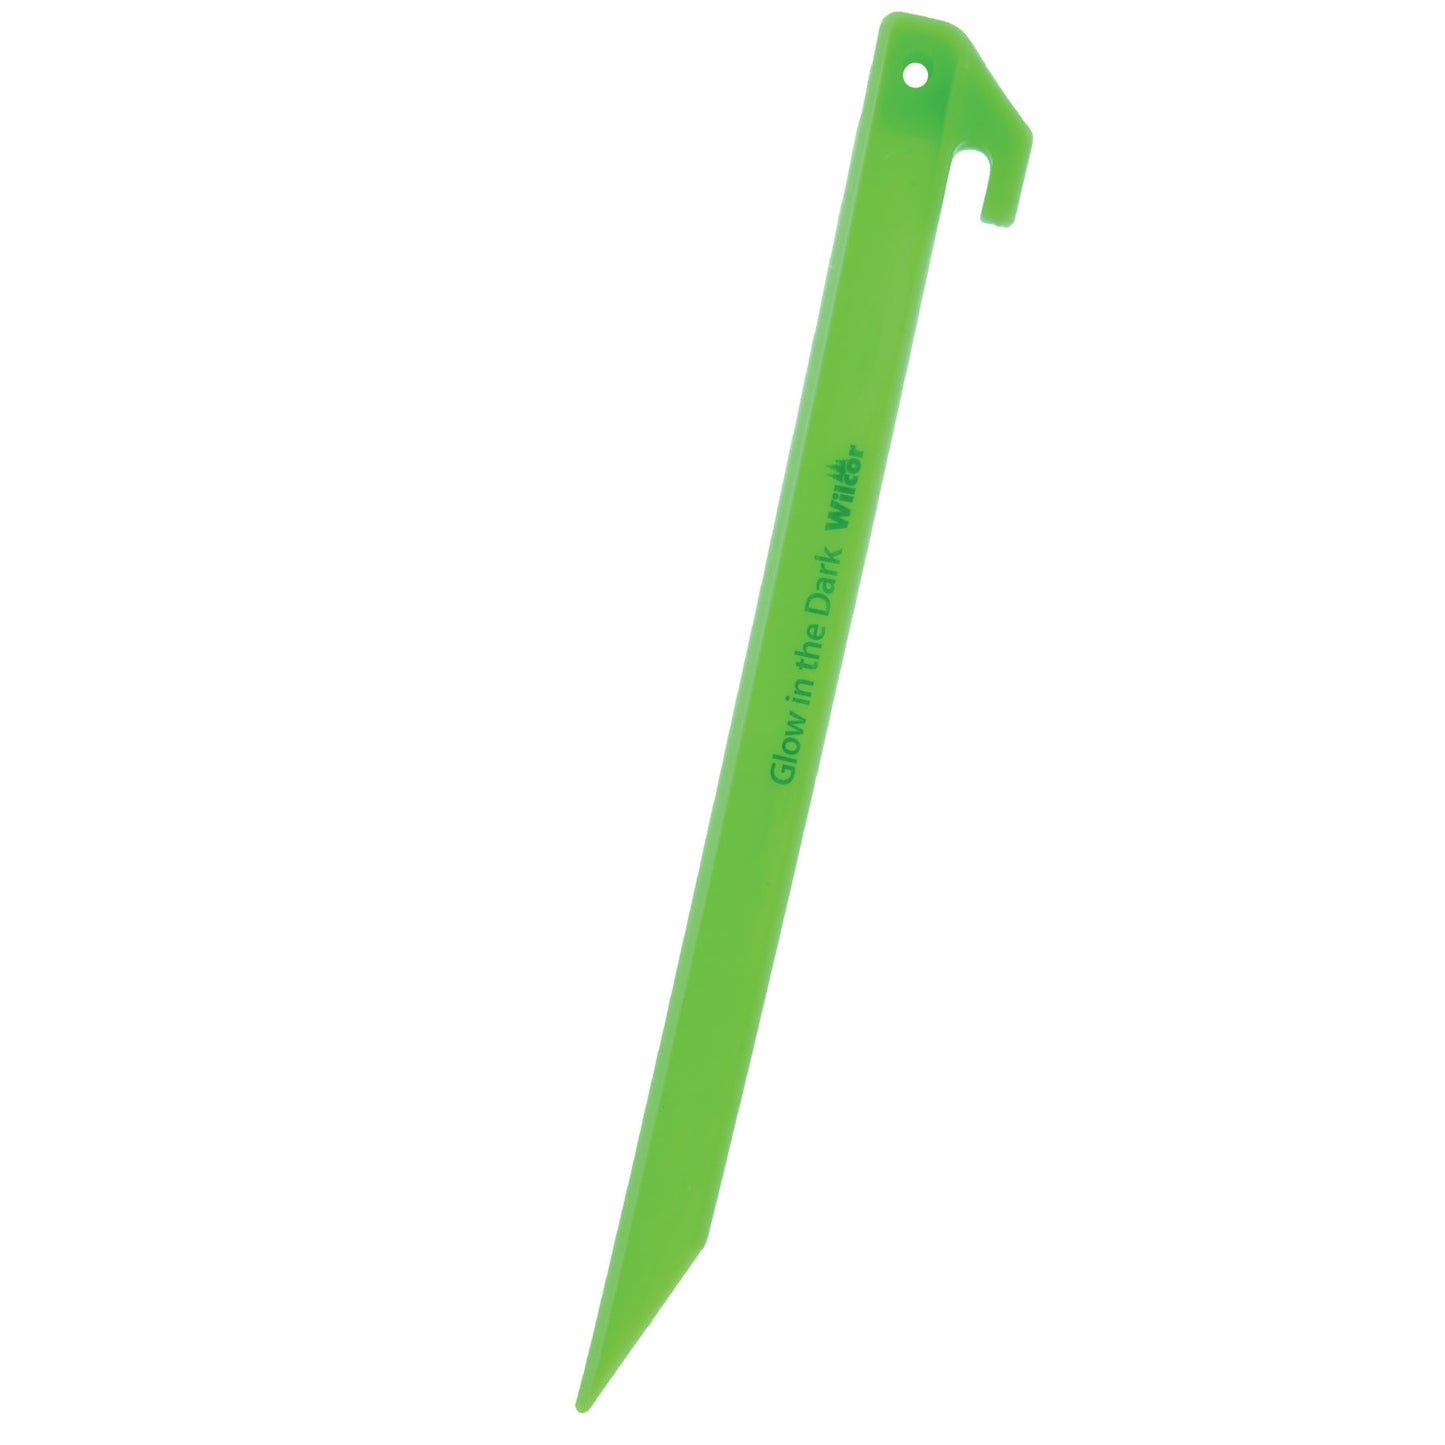 TENT STAKE 12" GLOW IN THE DARK